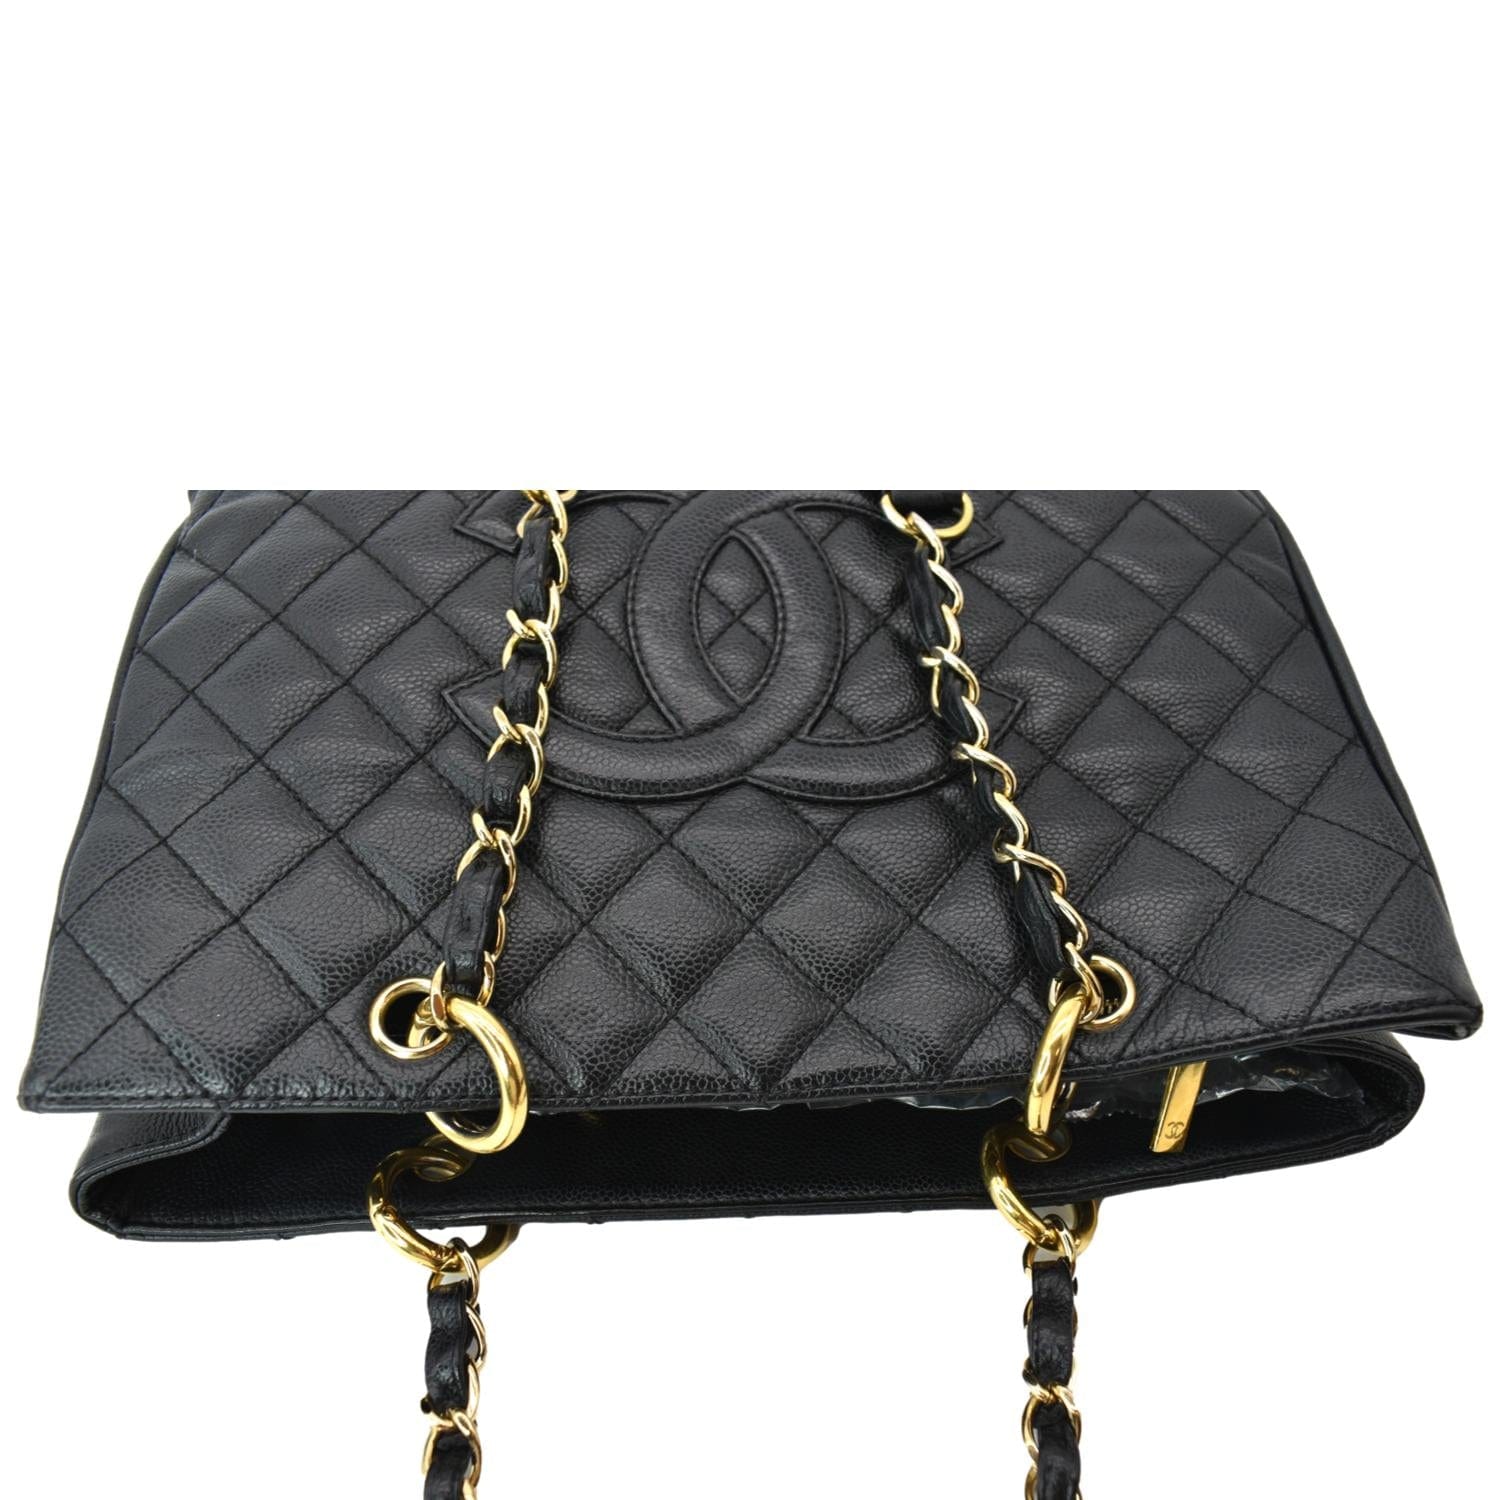 D&L online shop - Chanel leather and VIP 2021